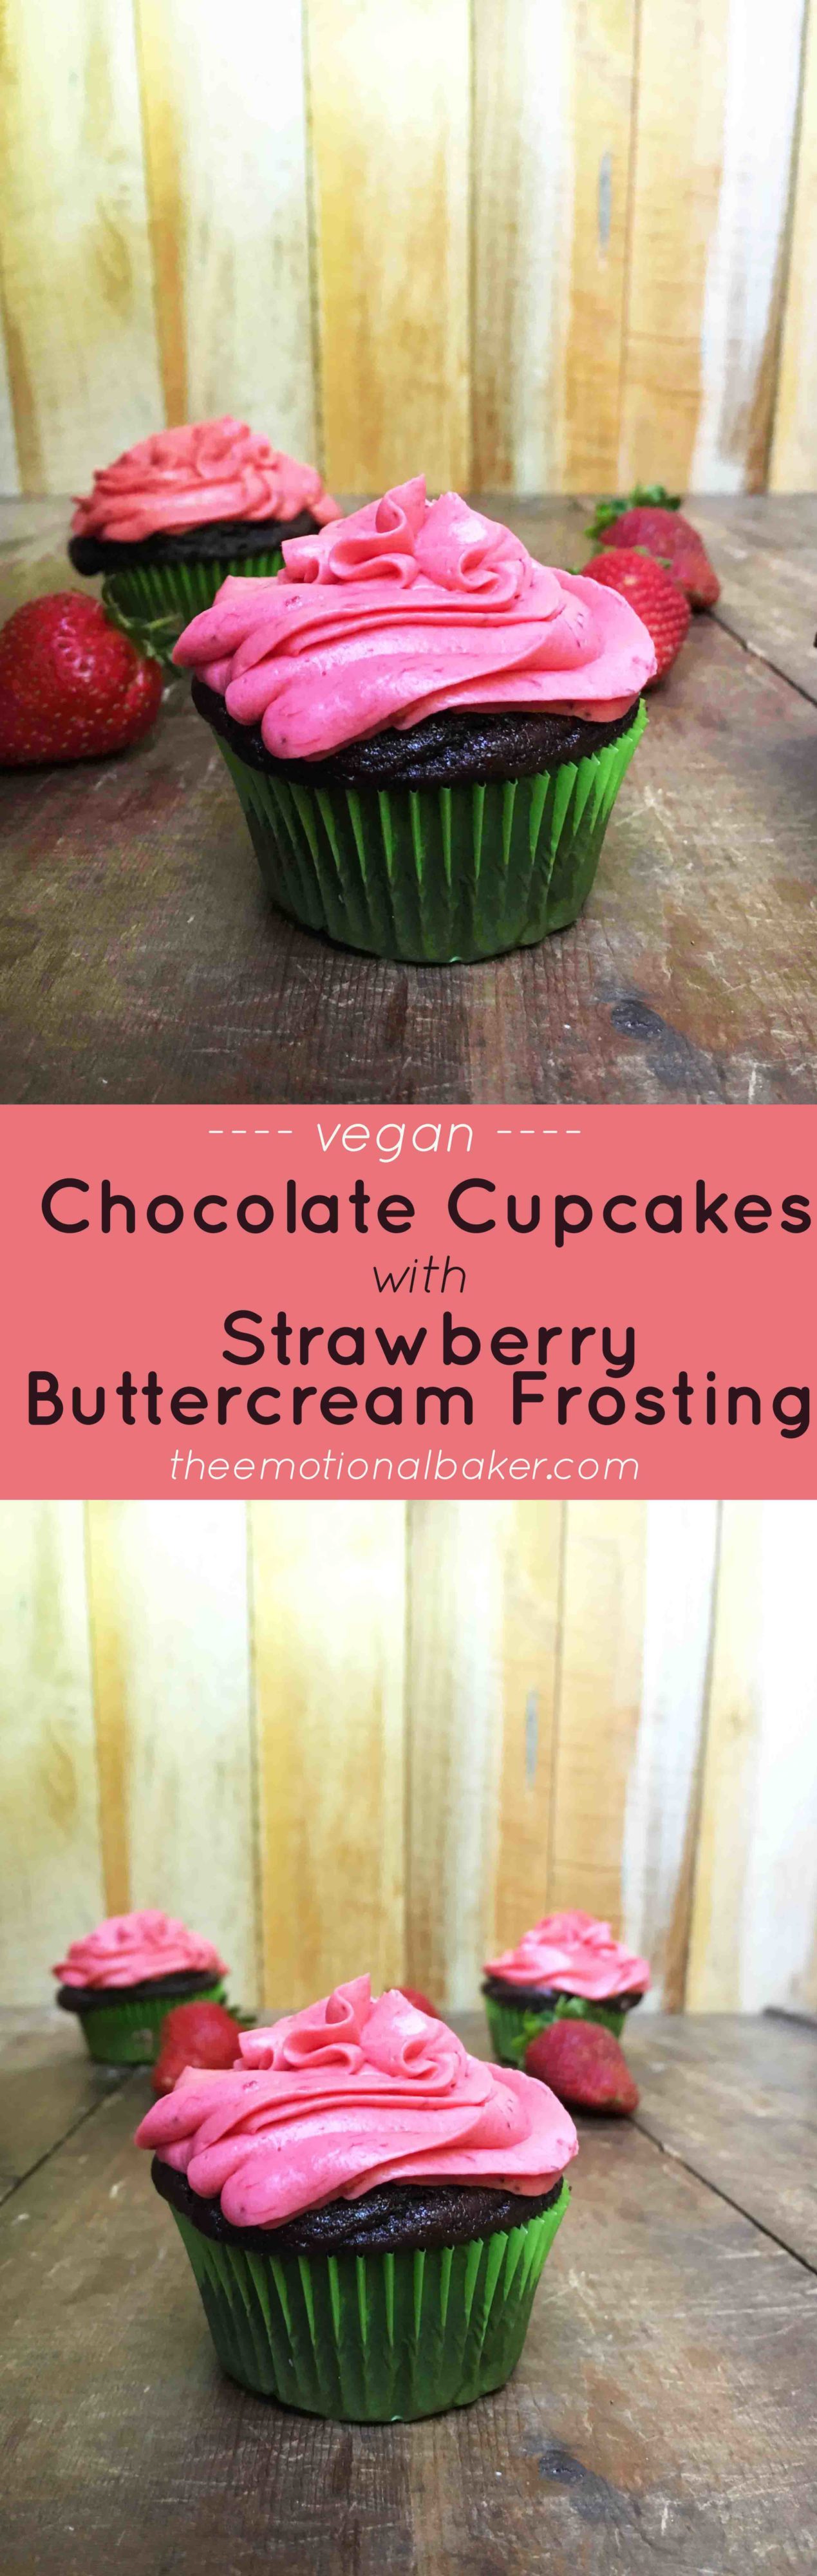 {Vegan} Chocolate Cupcakes with Strawberry Buttercream Frosting